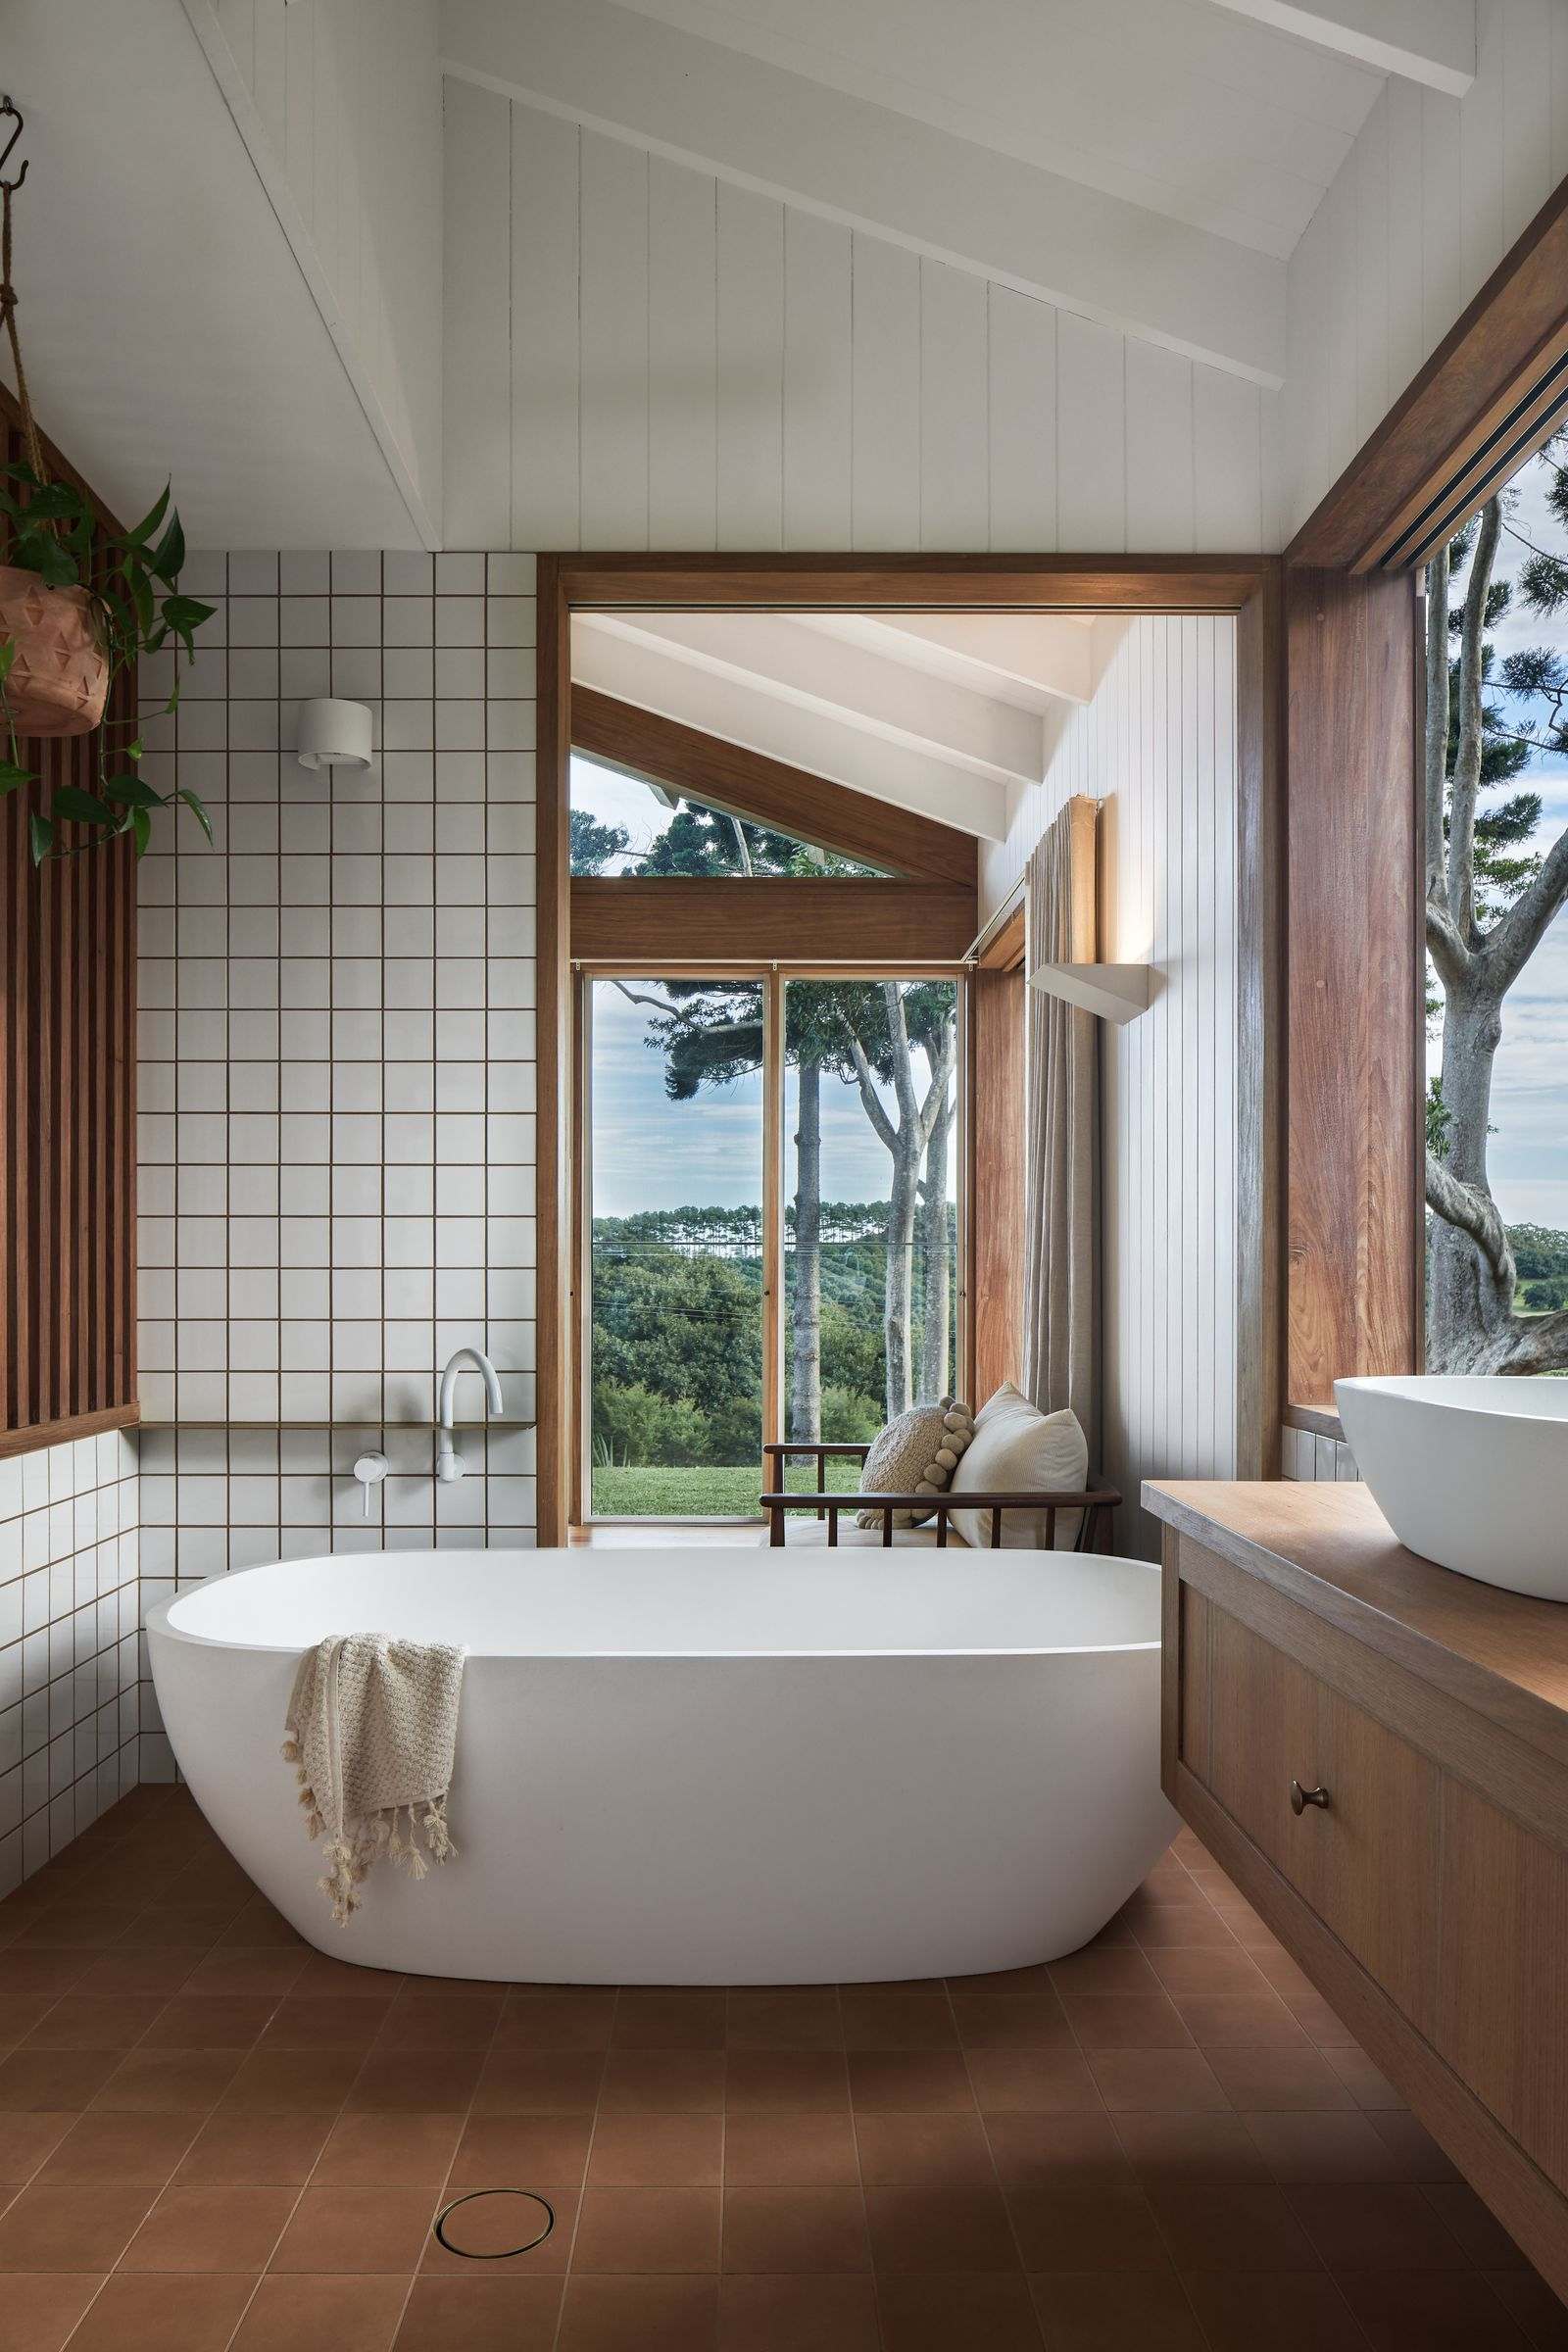 The Caretaker's by Aphora Architecture showing the freestanding bath tub with a view out to the rolling hills